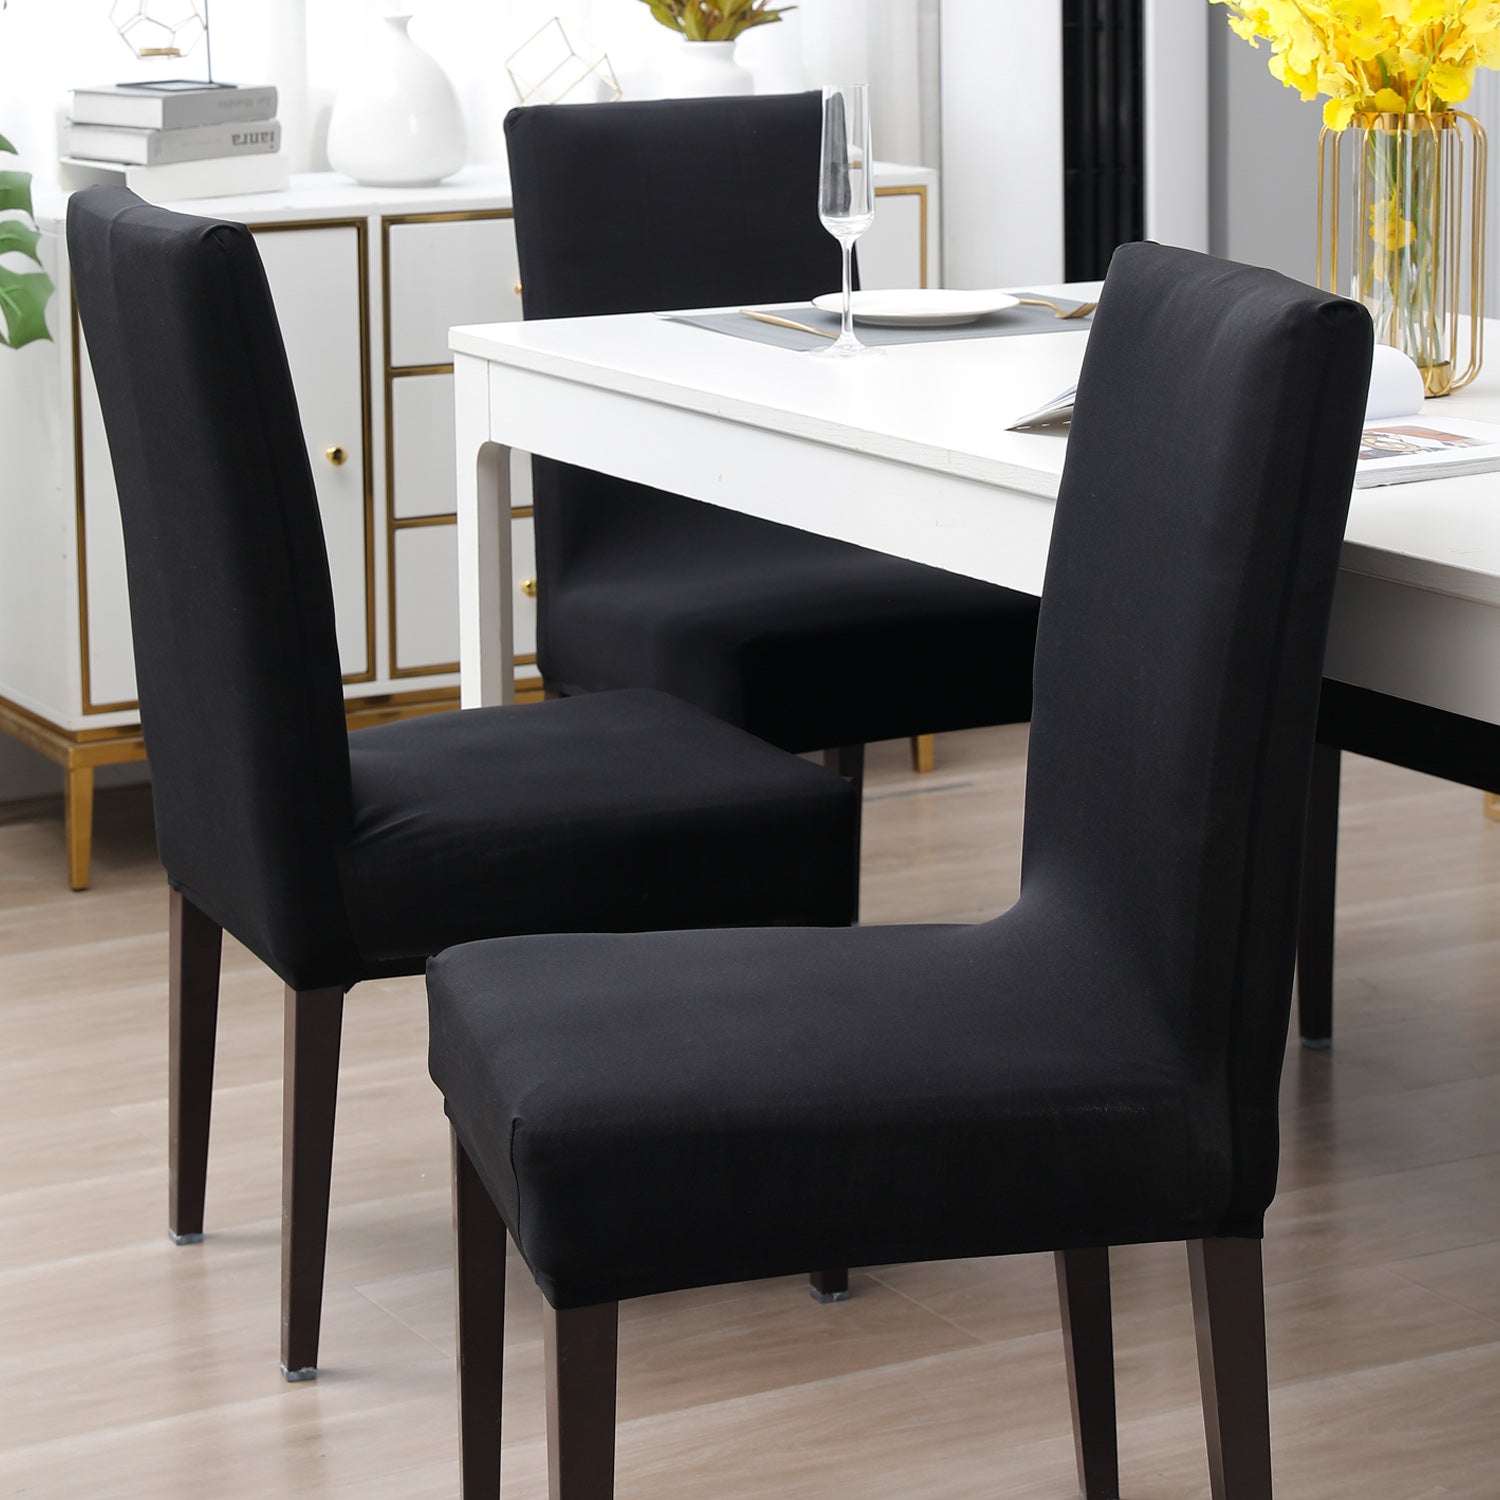 Elastic Stretchable Dining Chair Cover, Black